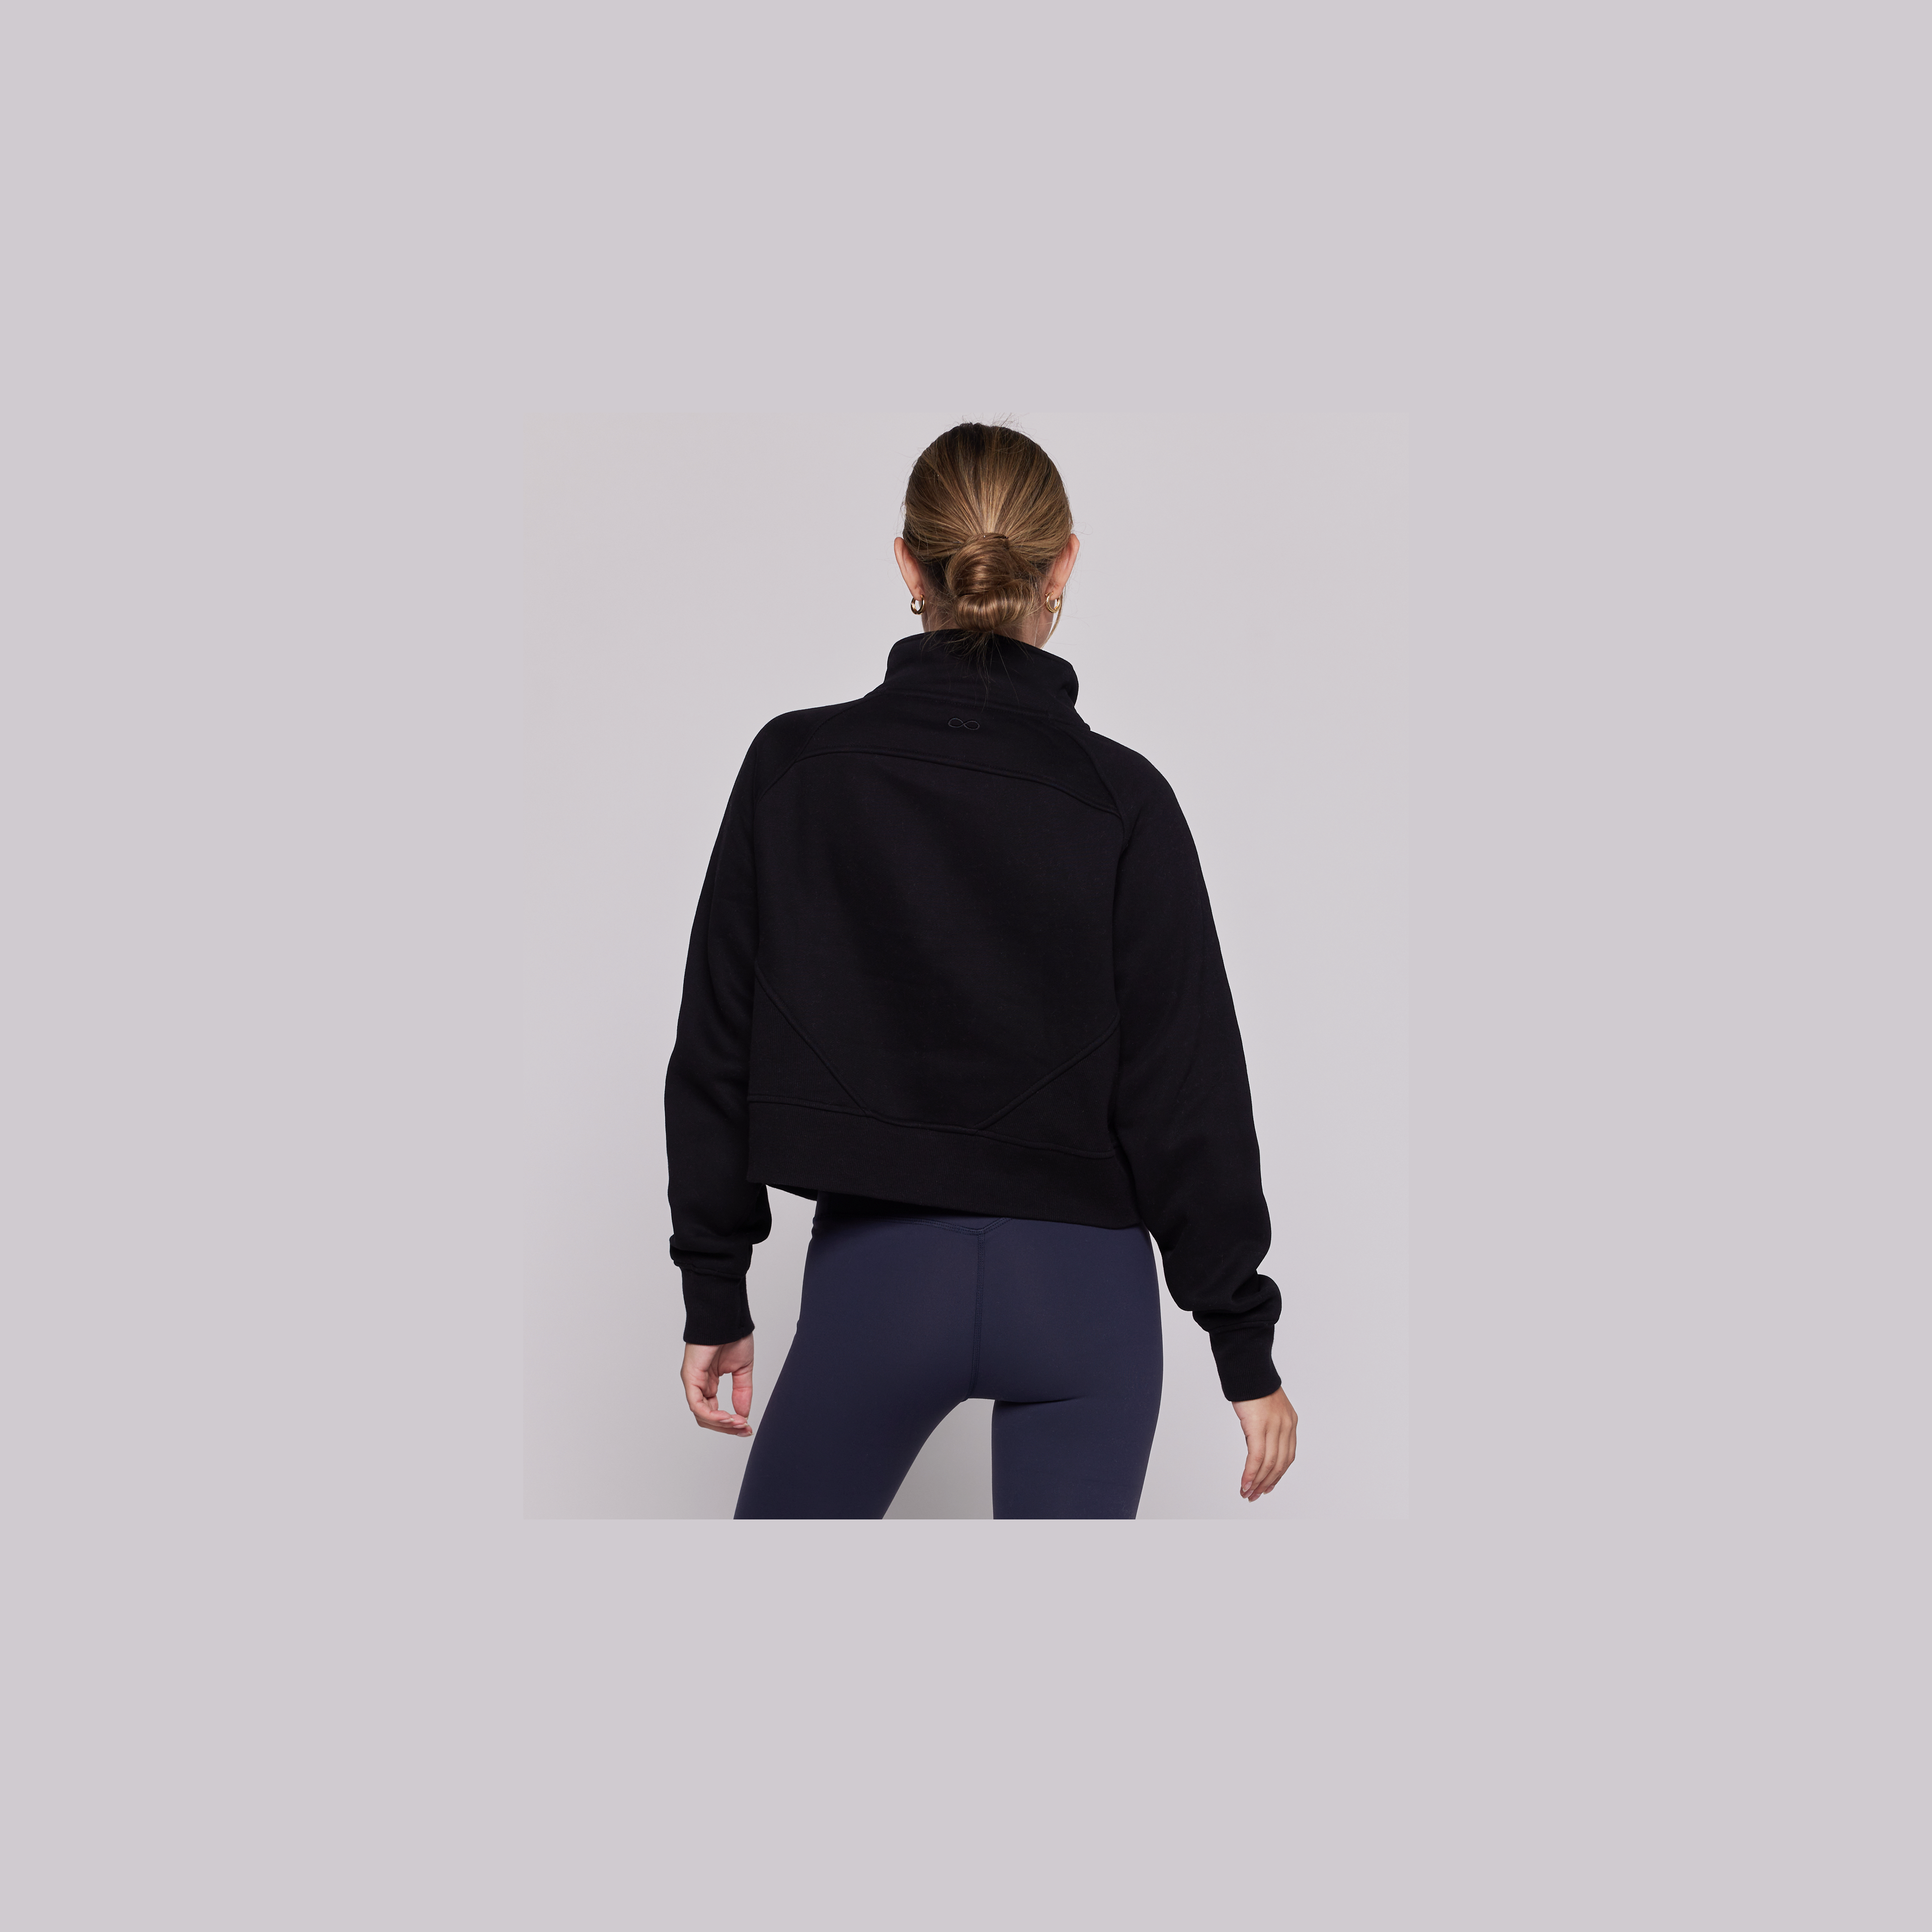 IVL Collective Cropped Half-zip Jacket on Marmalade